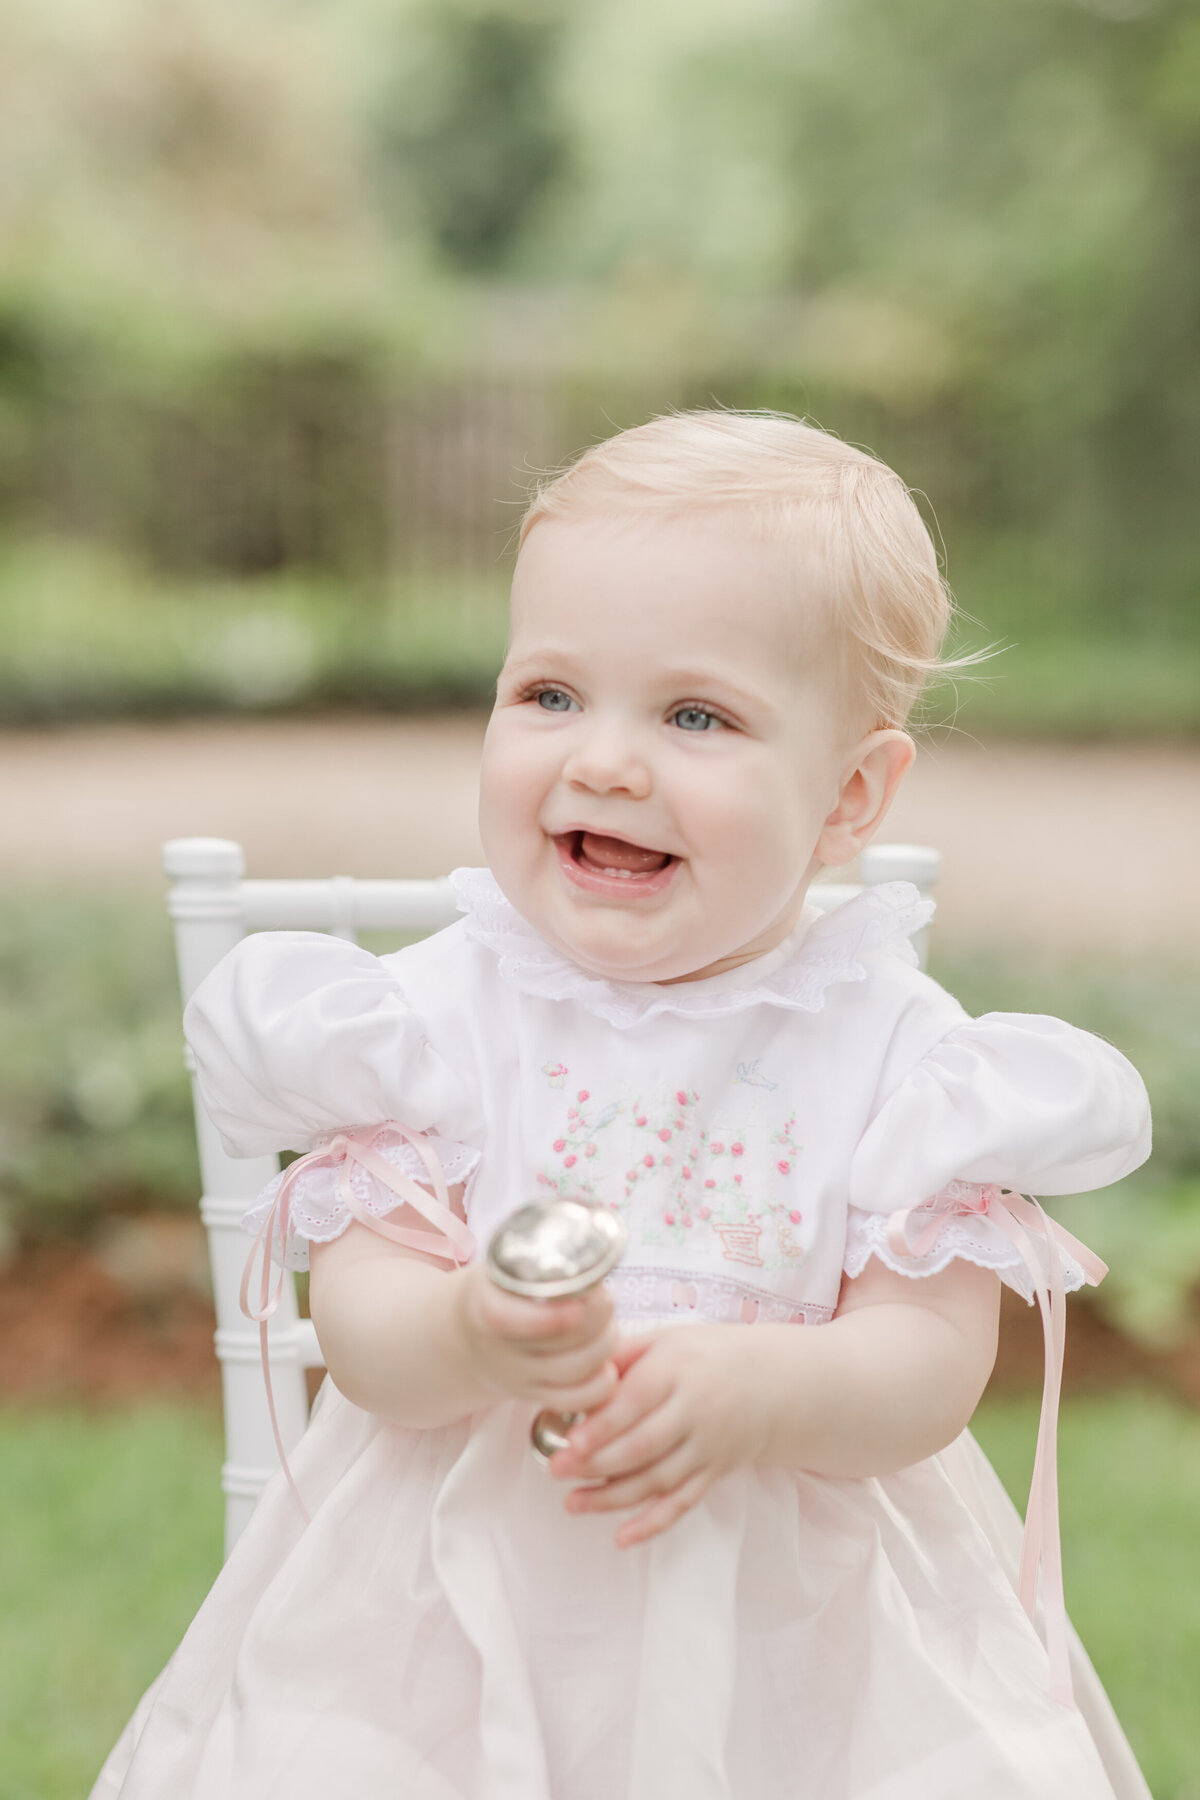 One year old girl holding a silver rattle and beaming for a portrait.